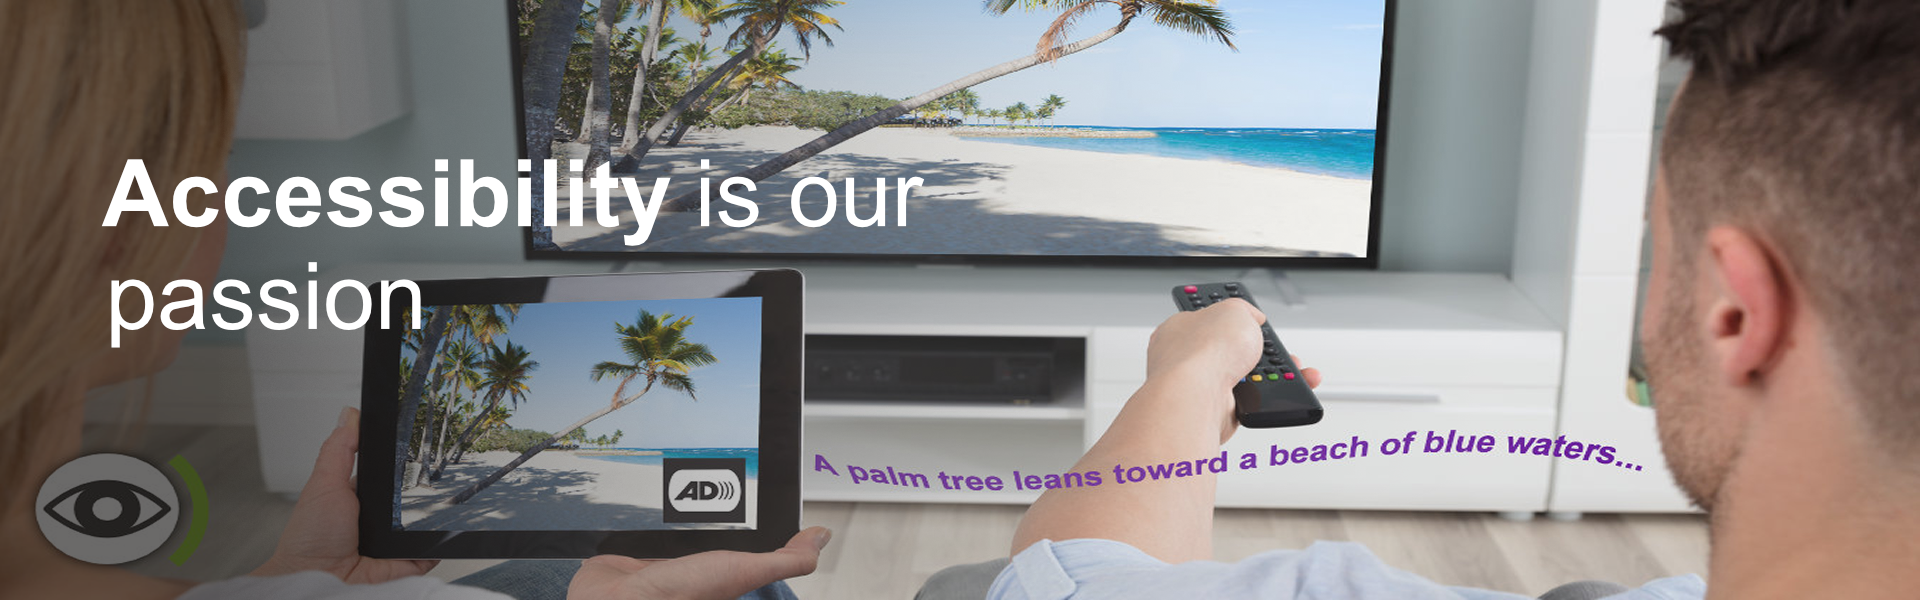 Text: Accessibility is our passion. Background: Image of 2 people watching TV. The same image from the TV appears on a tablet. Next to the AD icon on the tablet, floats out the phrase: a palm tree leans towards a beach of blue waters.